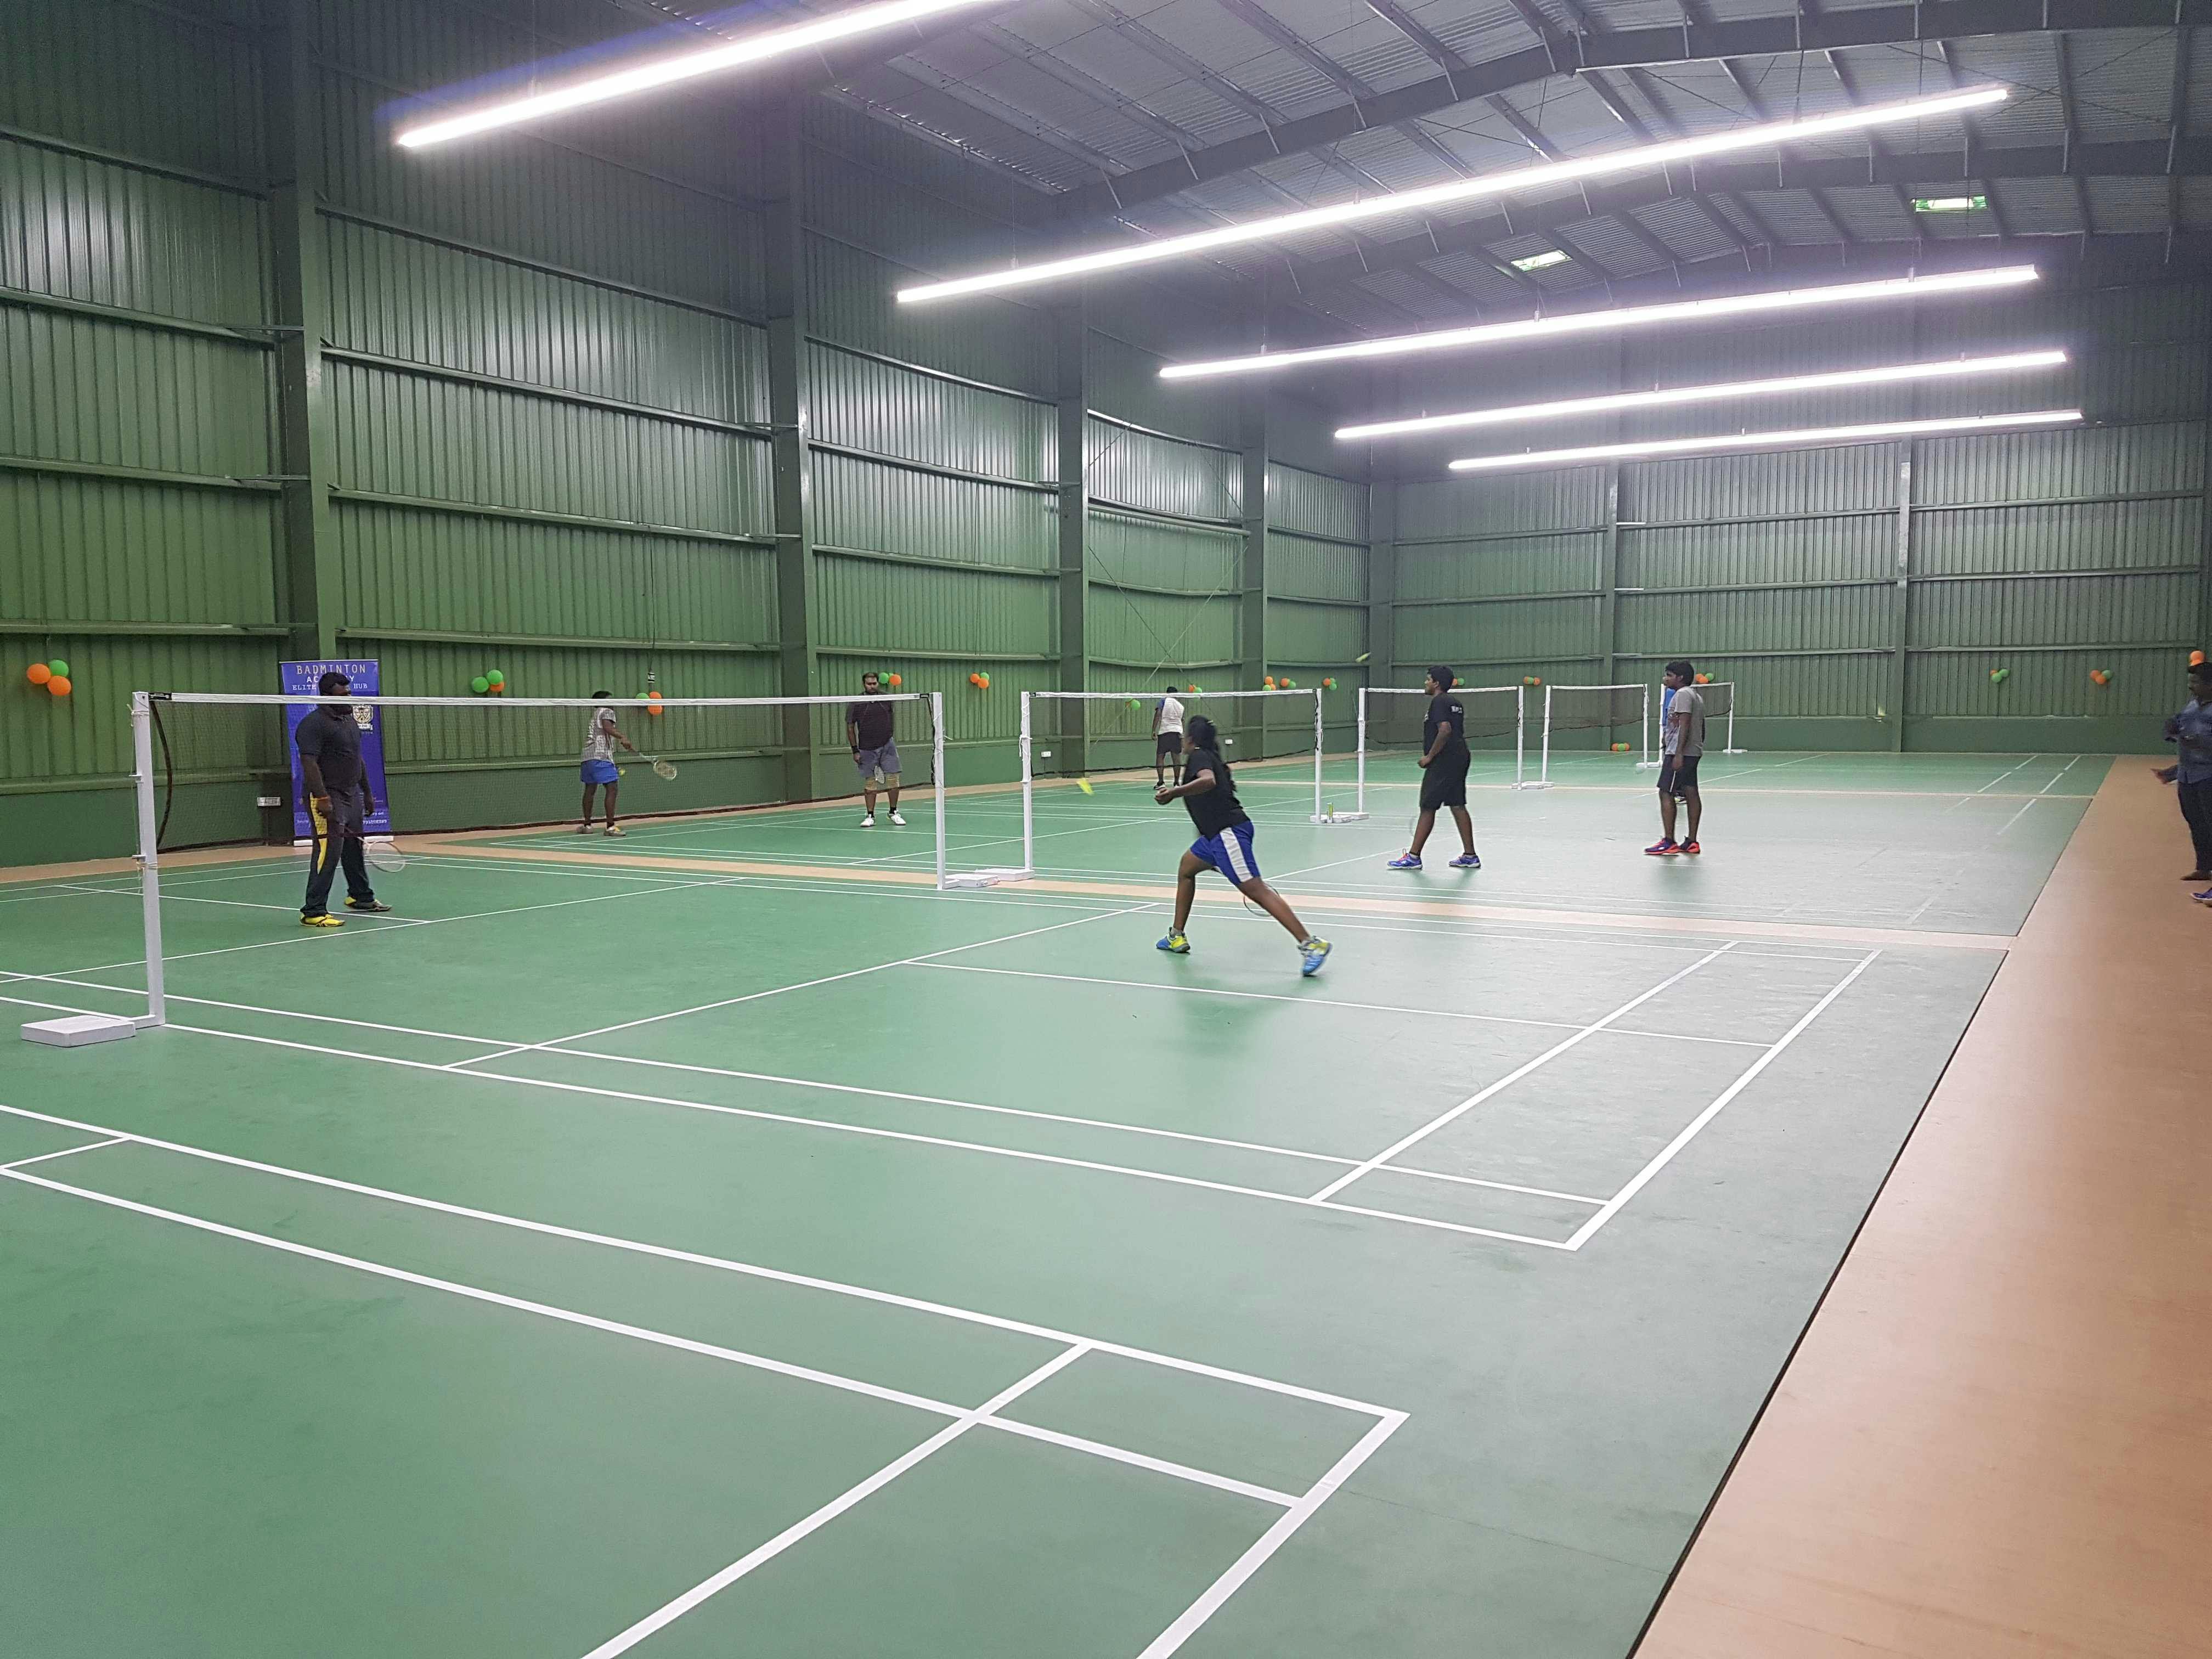 People are playing Badminton in Elite sports hub